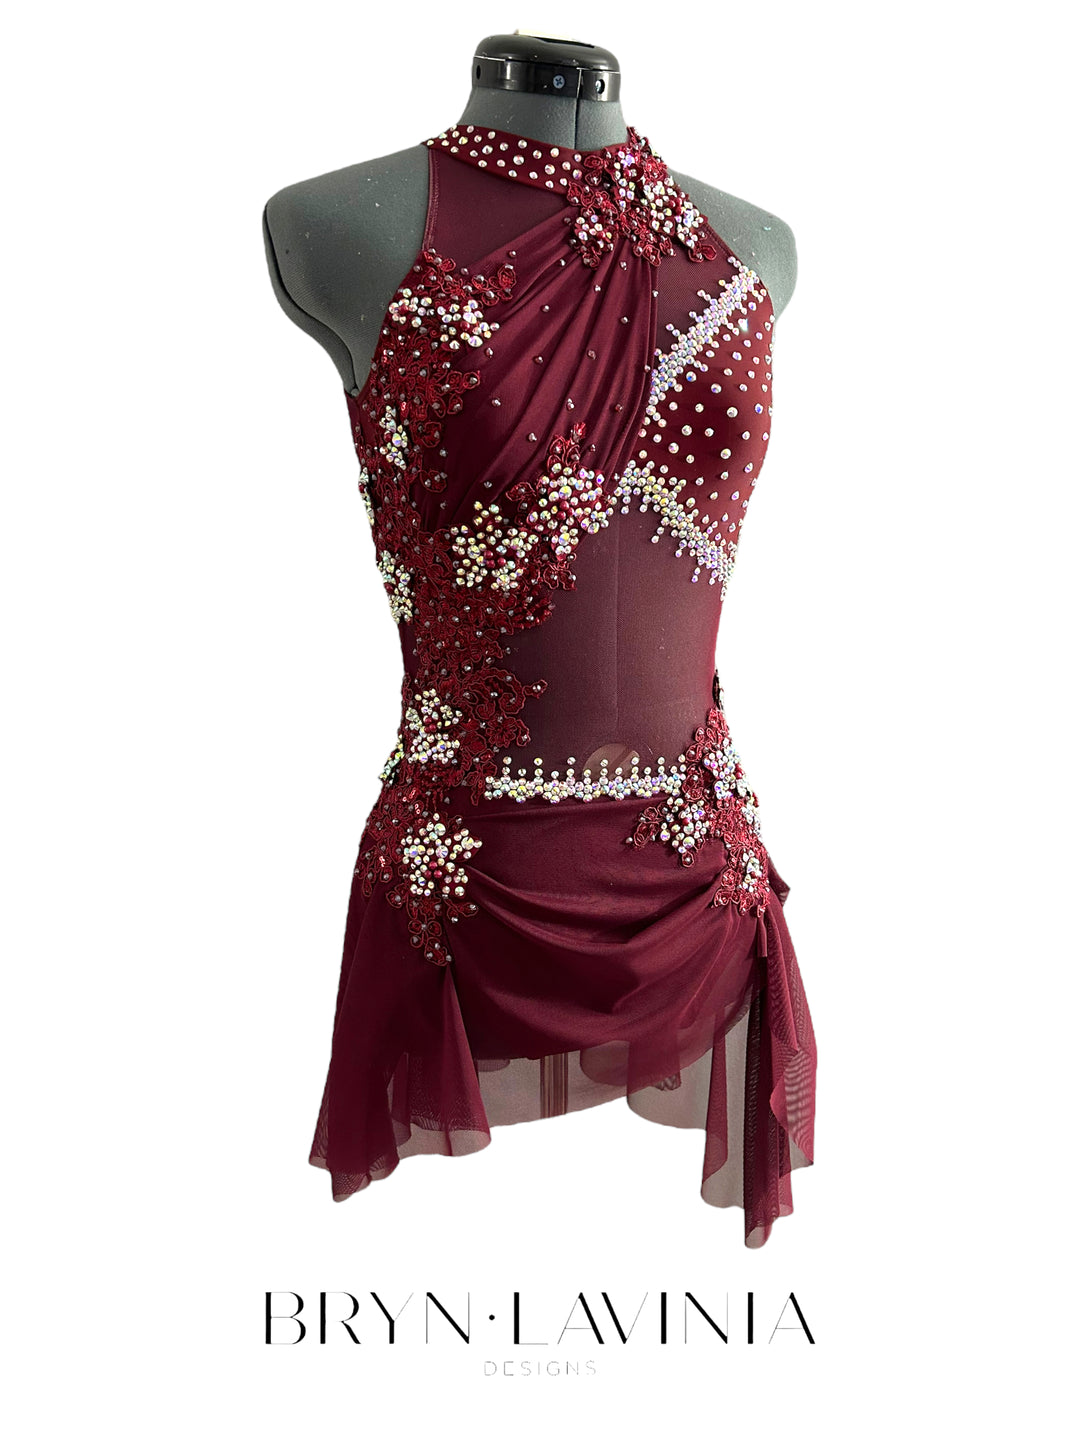 NEW AS Burgundy ready to ship costume